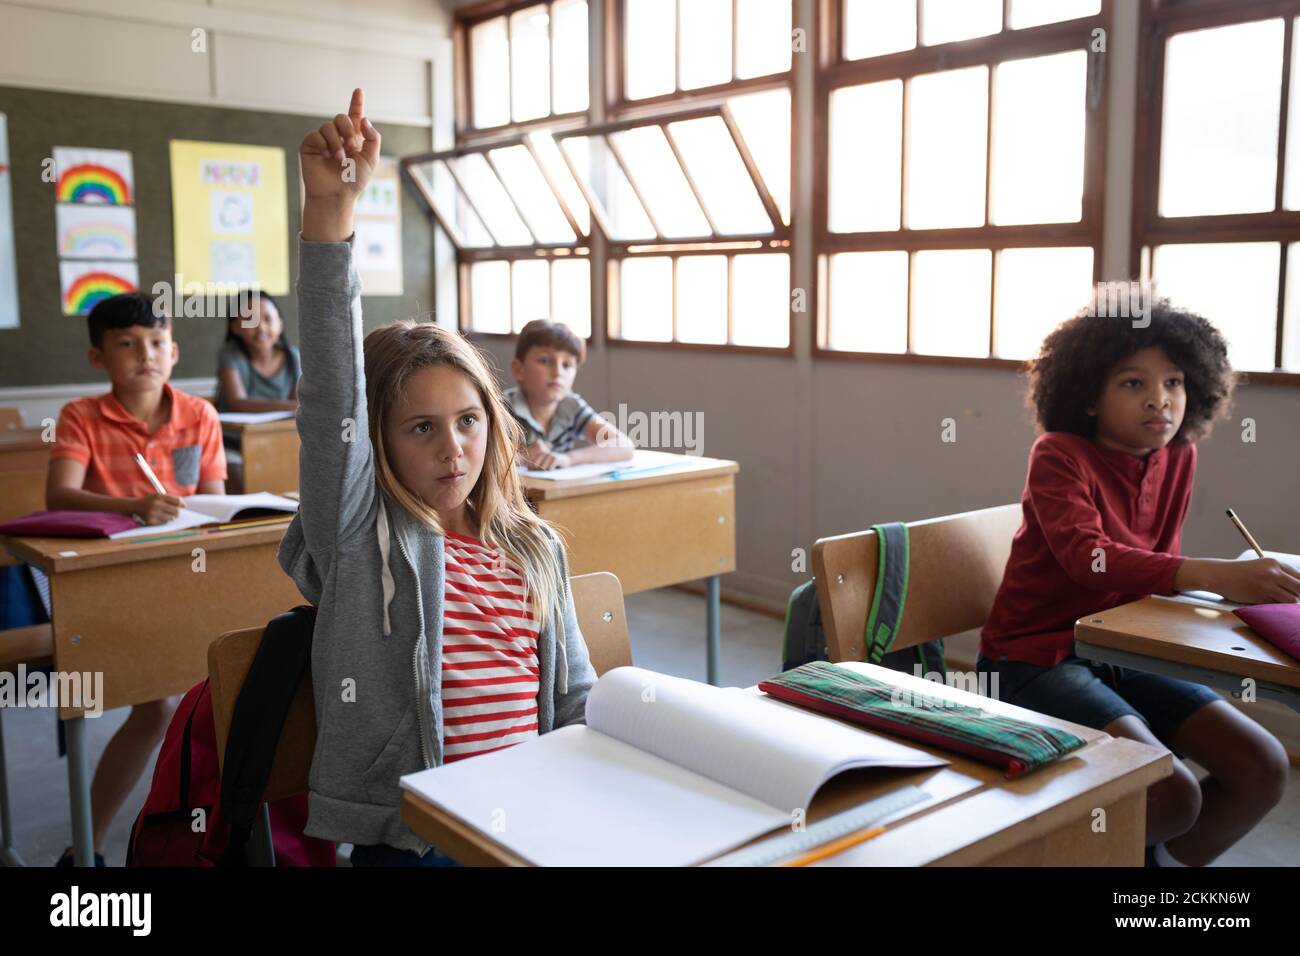 Girl raising her hand while sitting on her desk at school Stock Photo